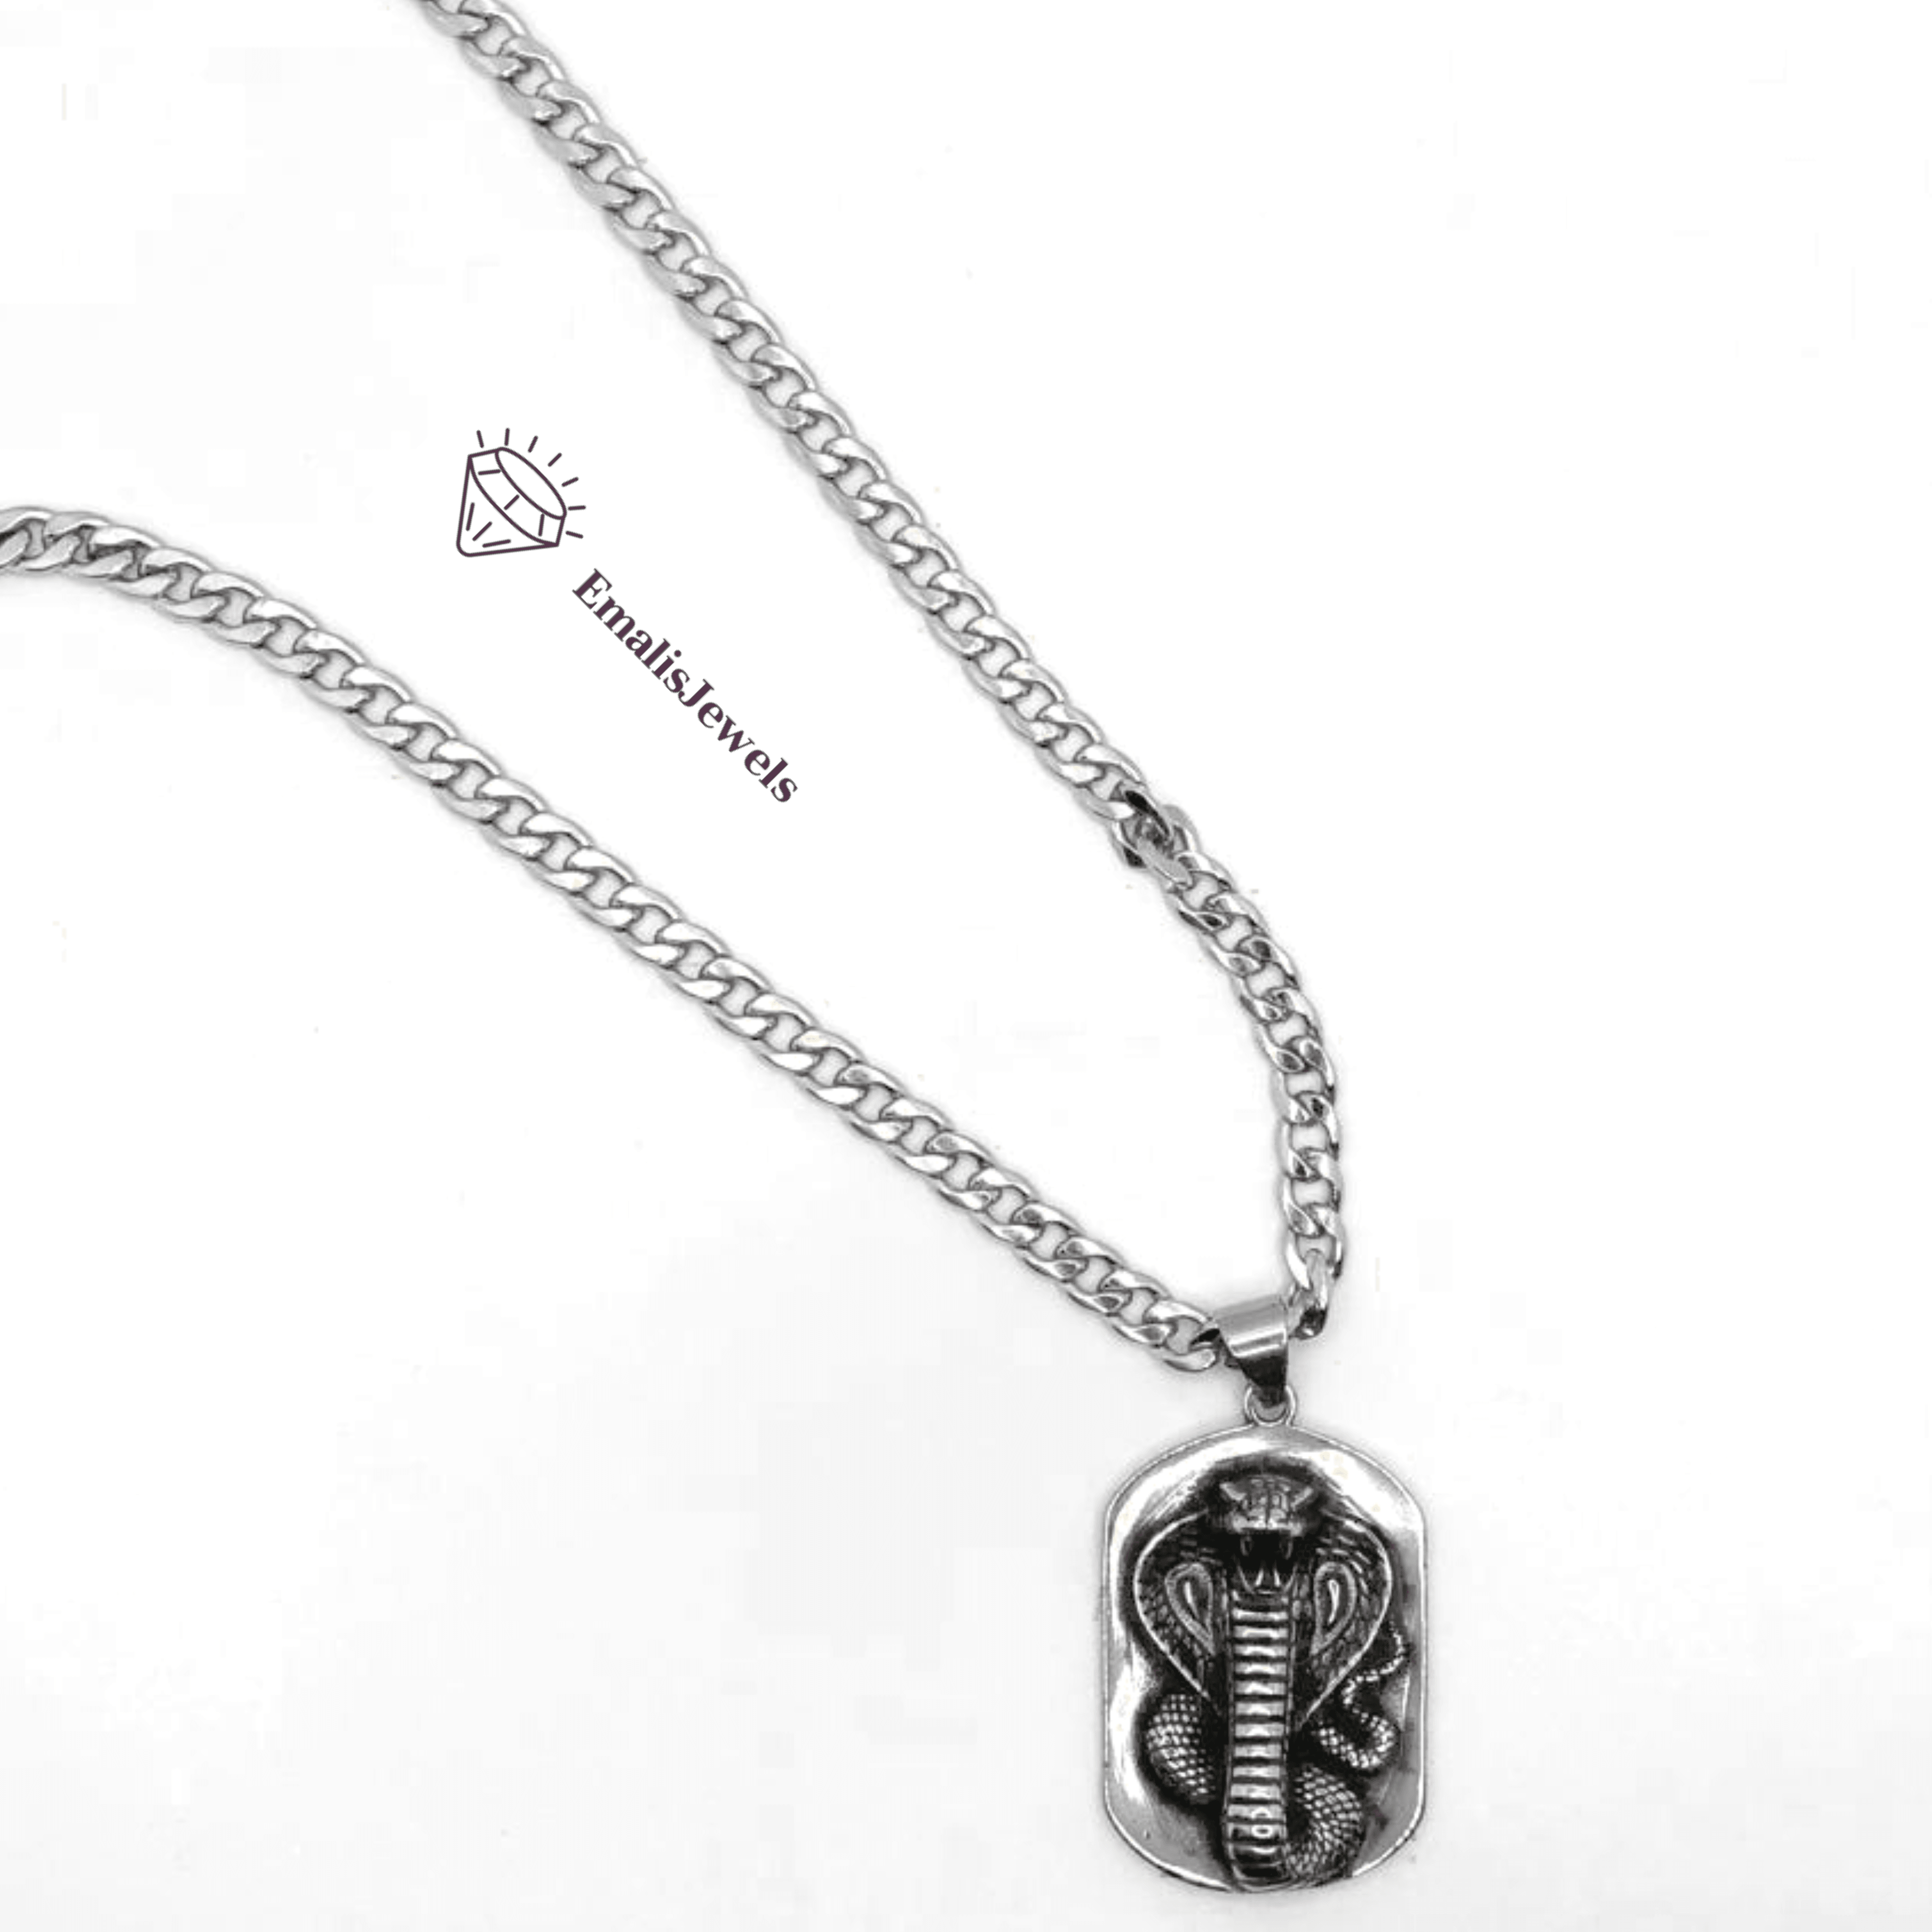 Stainless Steel Chain Necklace and Stainless Steel Serpent Pendant